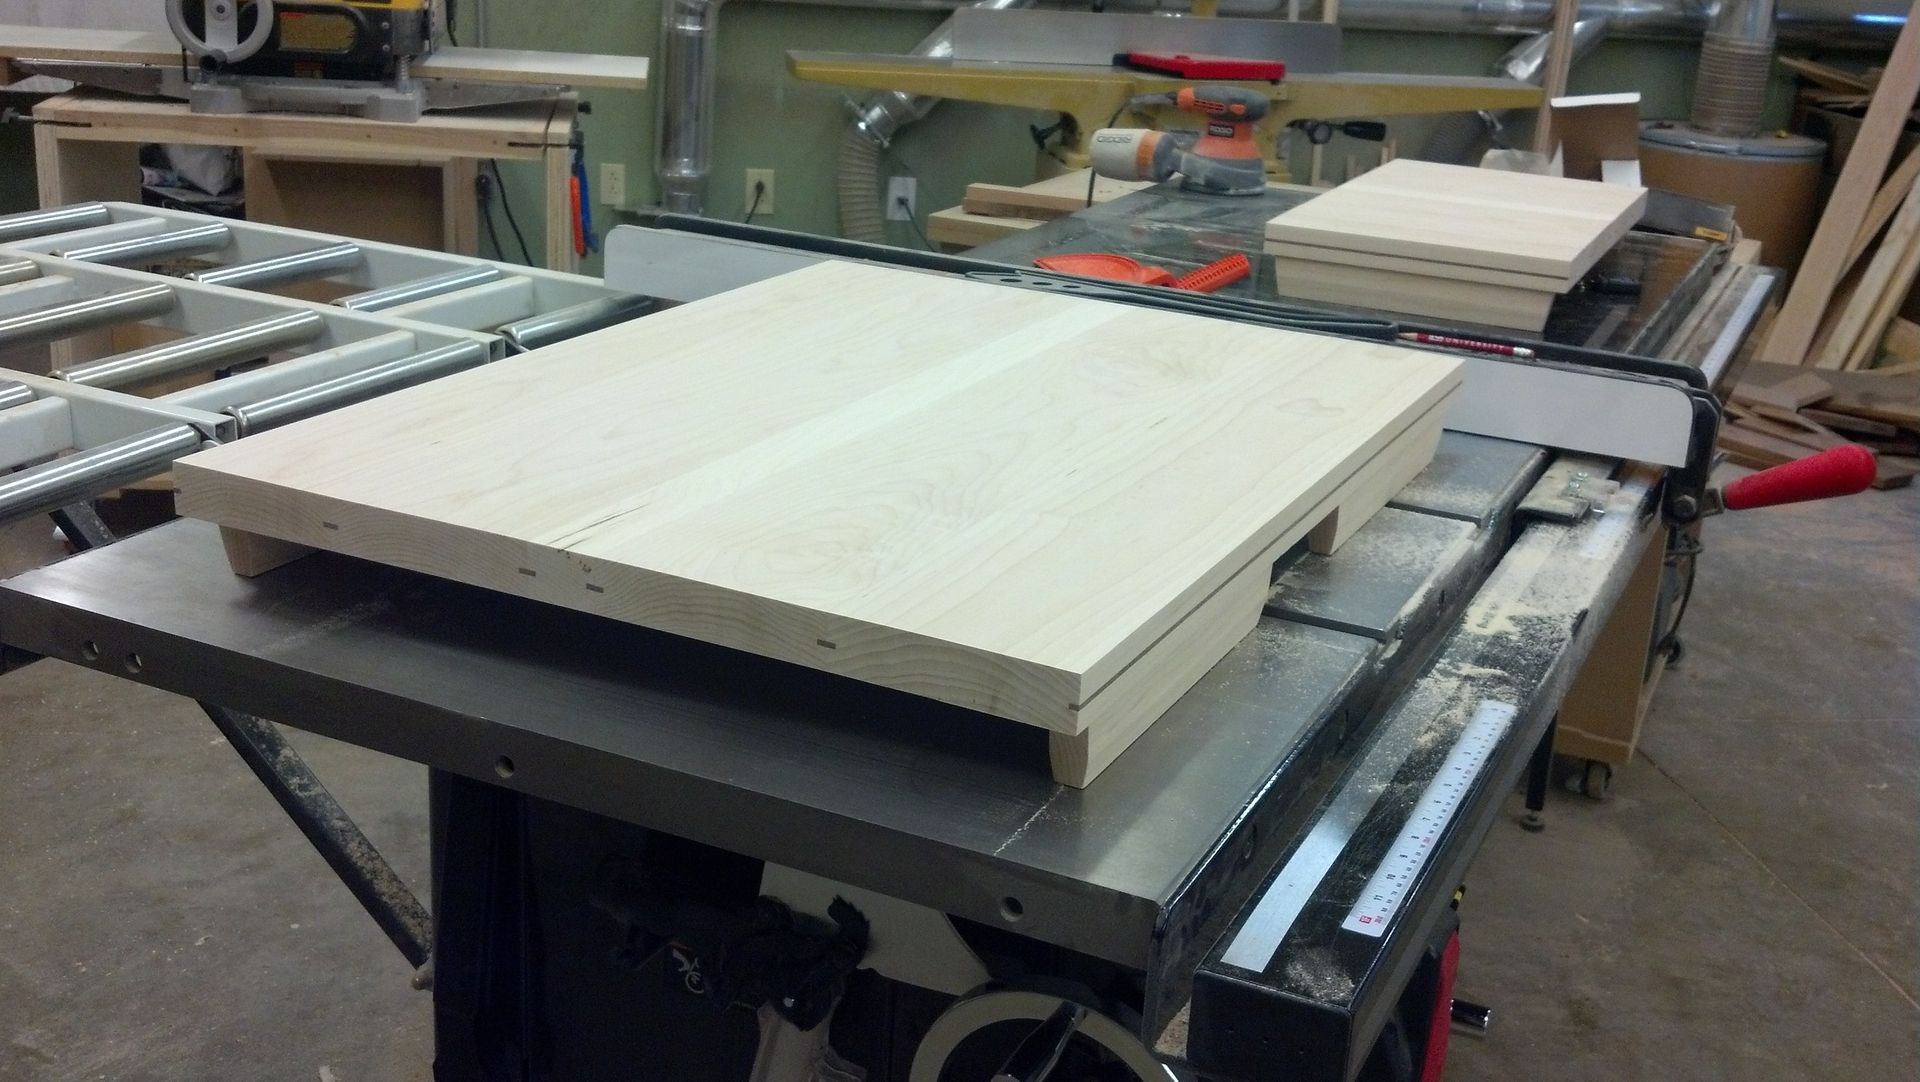 How To Make A Giant End Grain Cutting Board//Stove Top Cover From